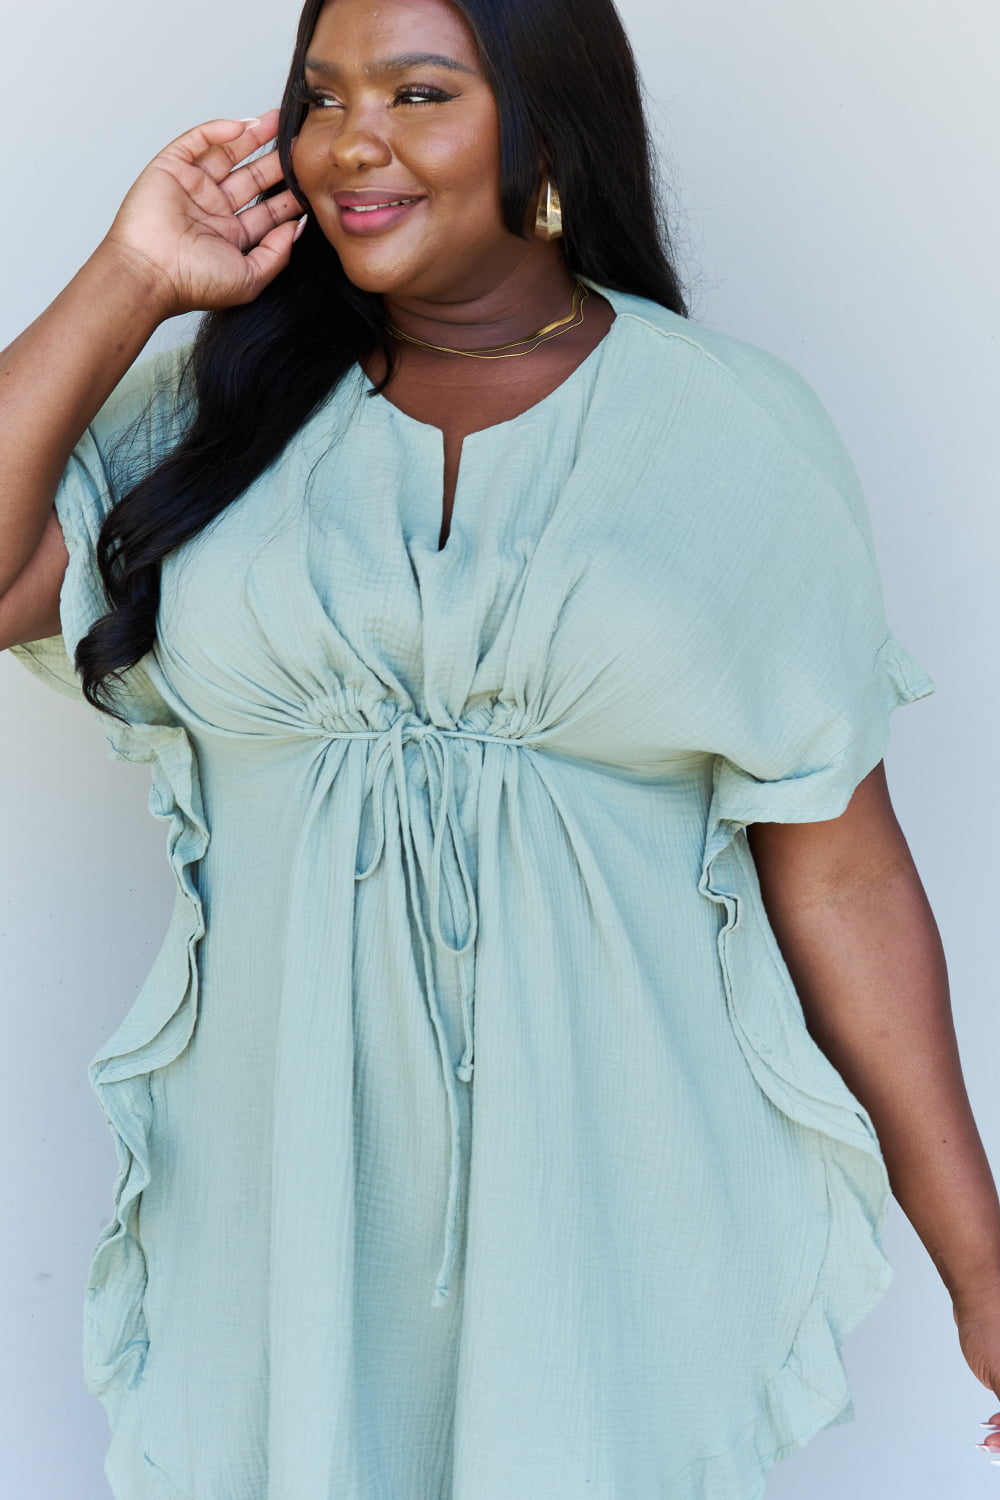 Ninexis Out Of Time Full Size Ruffle Hem Dress with Drawstring Waistband in Light Sage - Casual & Maxi Dresses - FITGGINS